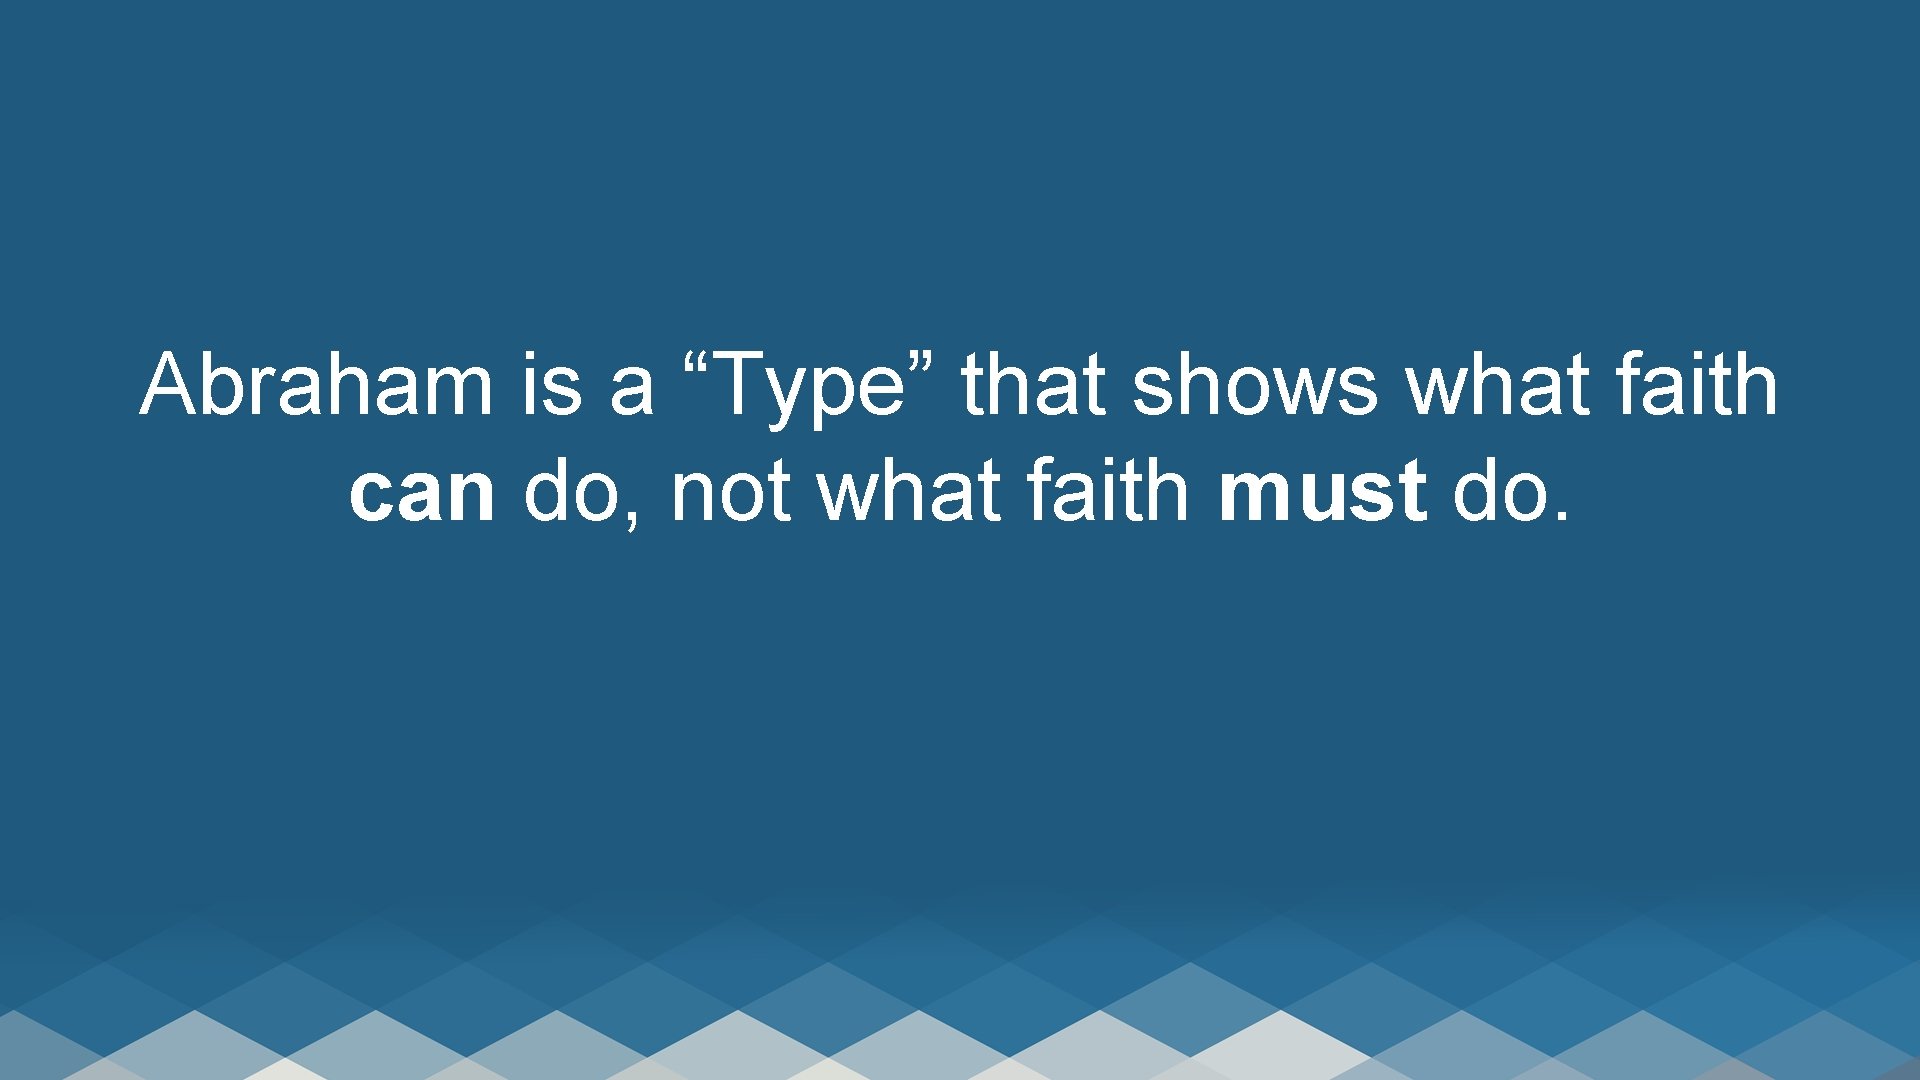 Abraham is a “Type” that shows what faith can do, not what faith must